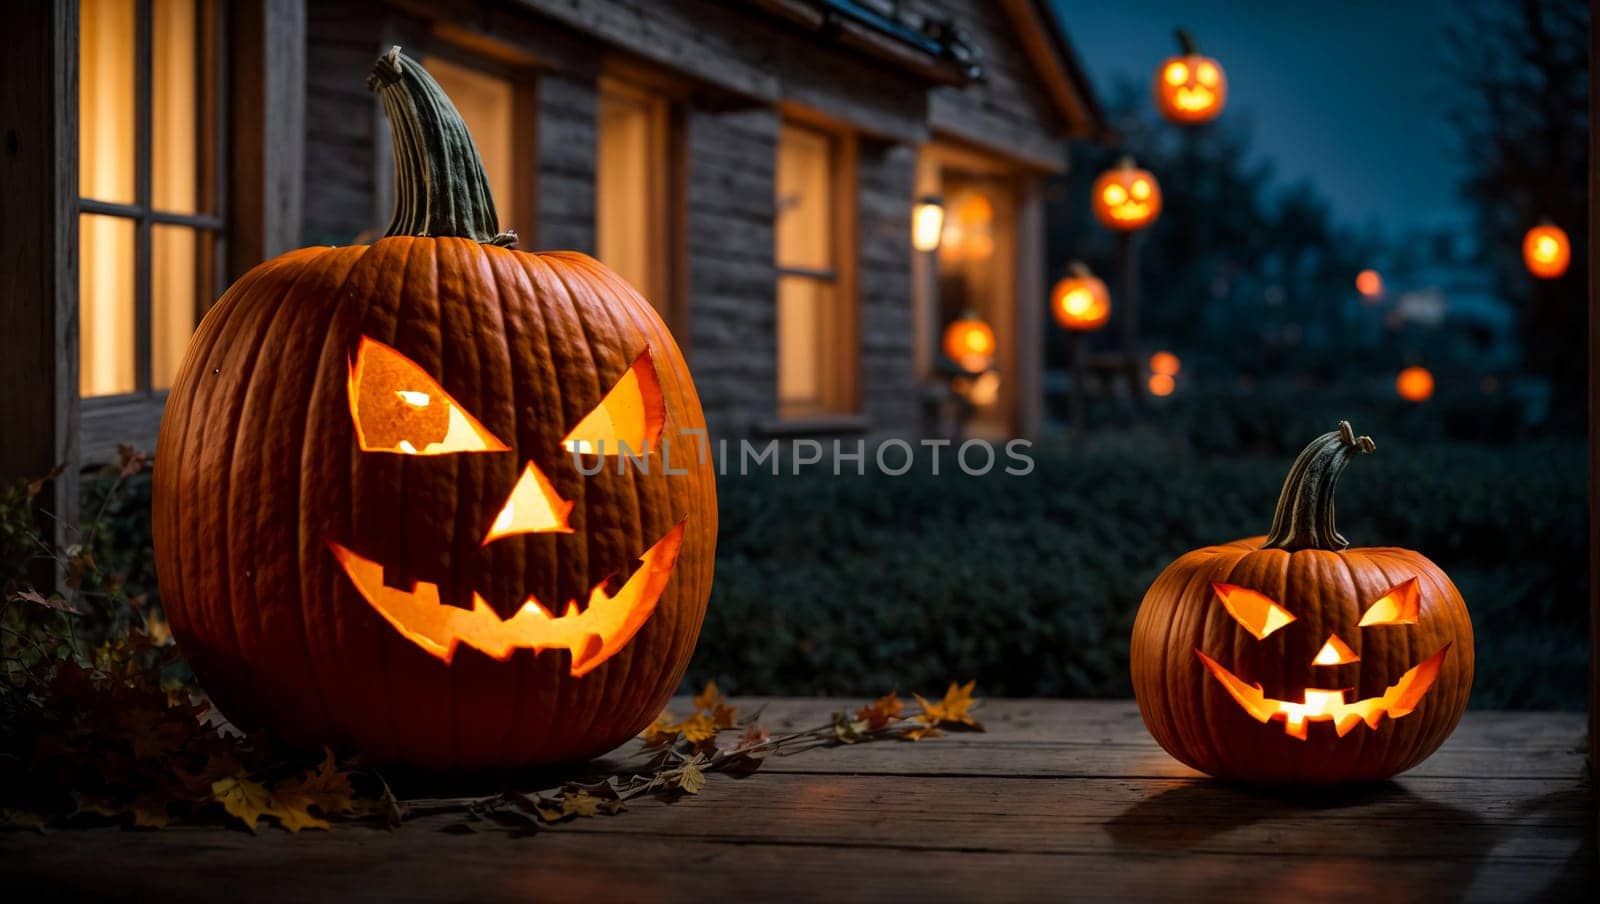 A pumpkin carved in the shape of a lantern, with a terrifying and sinister face by Севостьянов